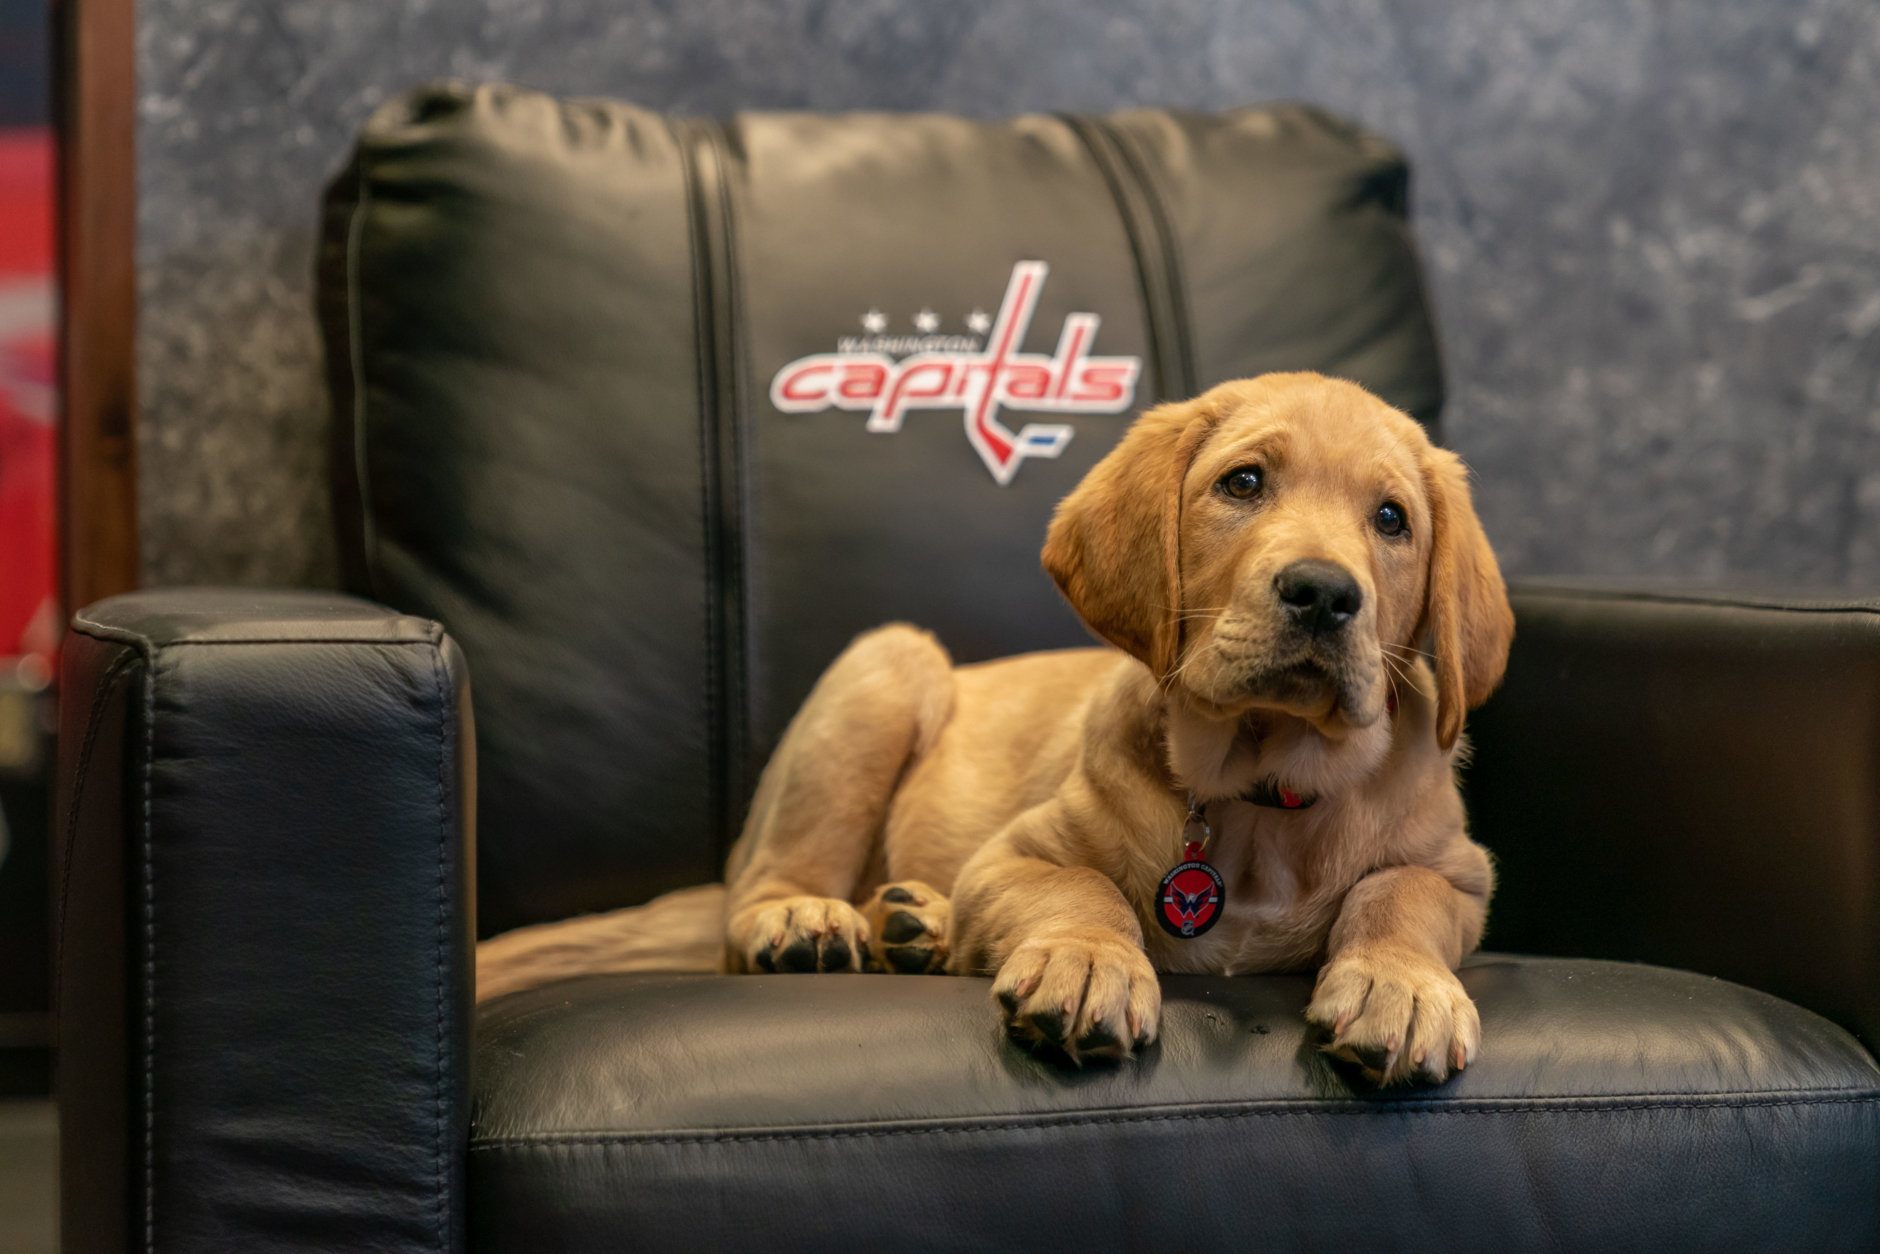 SEE IT, Capitals service dog Biscuit goes to puppy class for training